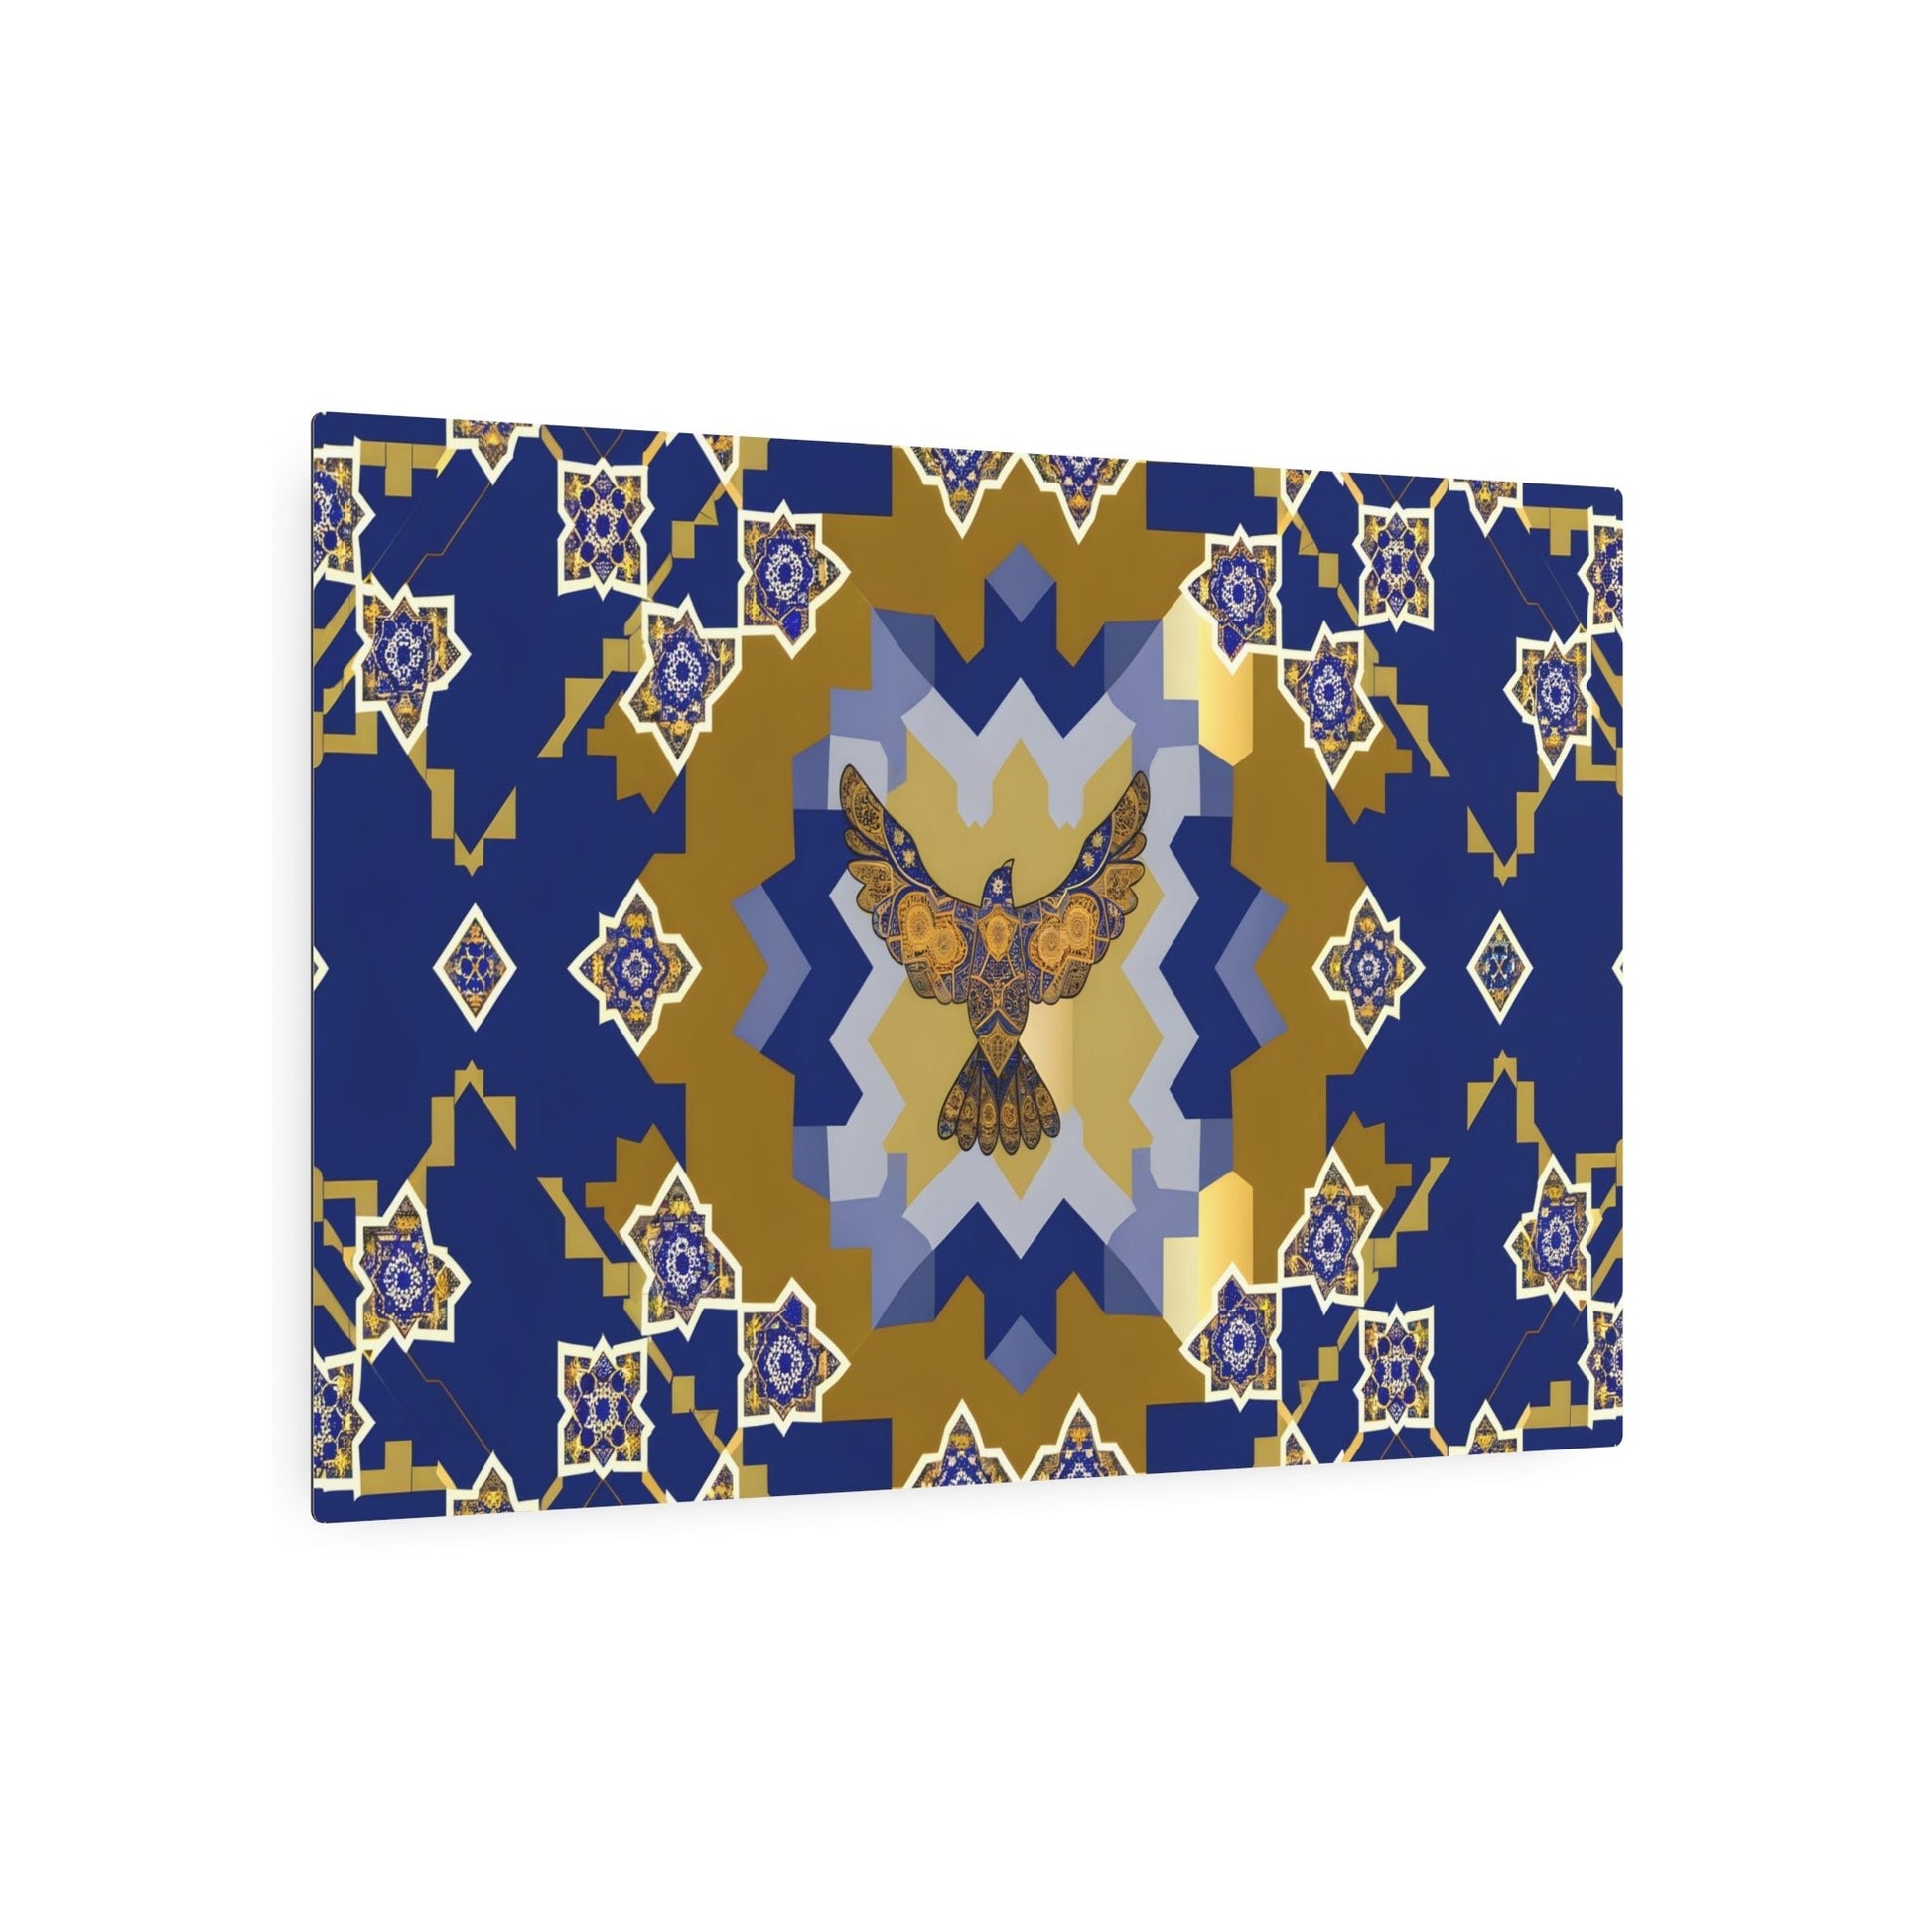 Metal Poster Art | "Authentic Islamic Geometric Artwork Featuring Detailed Bird Design in Rich Blues, Golds, and Whites - Non-Western & Global Styles Collection" - Metal Poster Art 36″ x 24″ (Horizontal) 0.12''